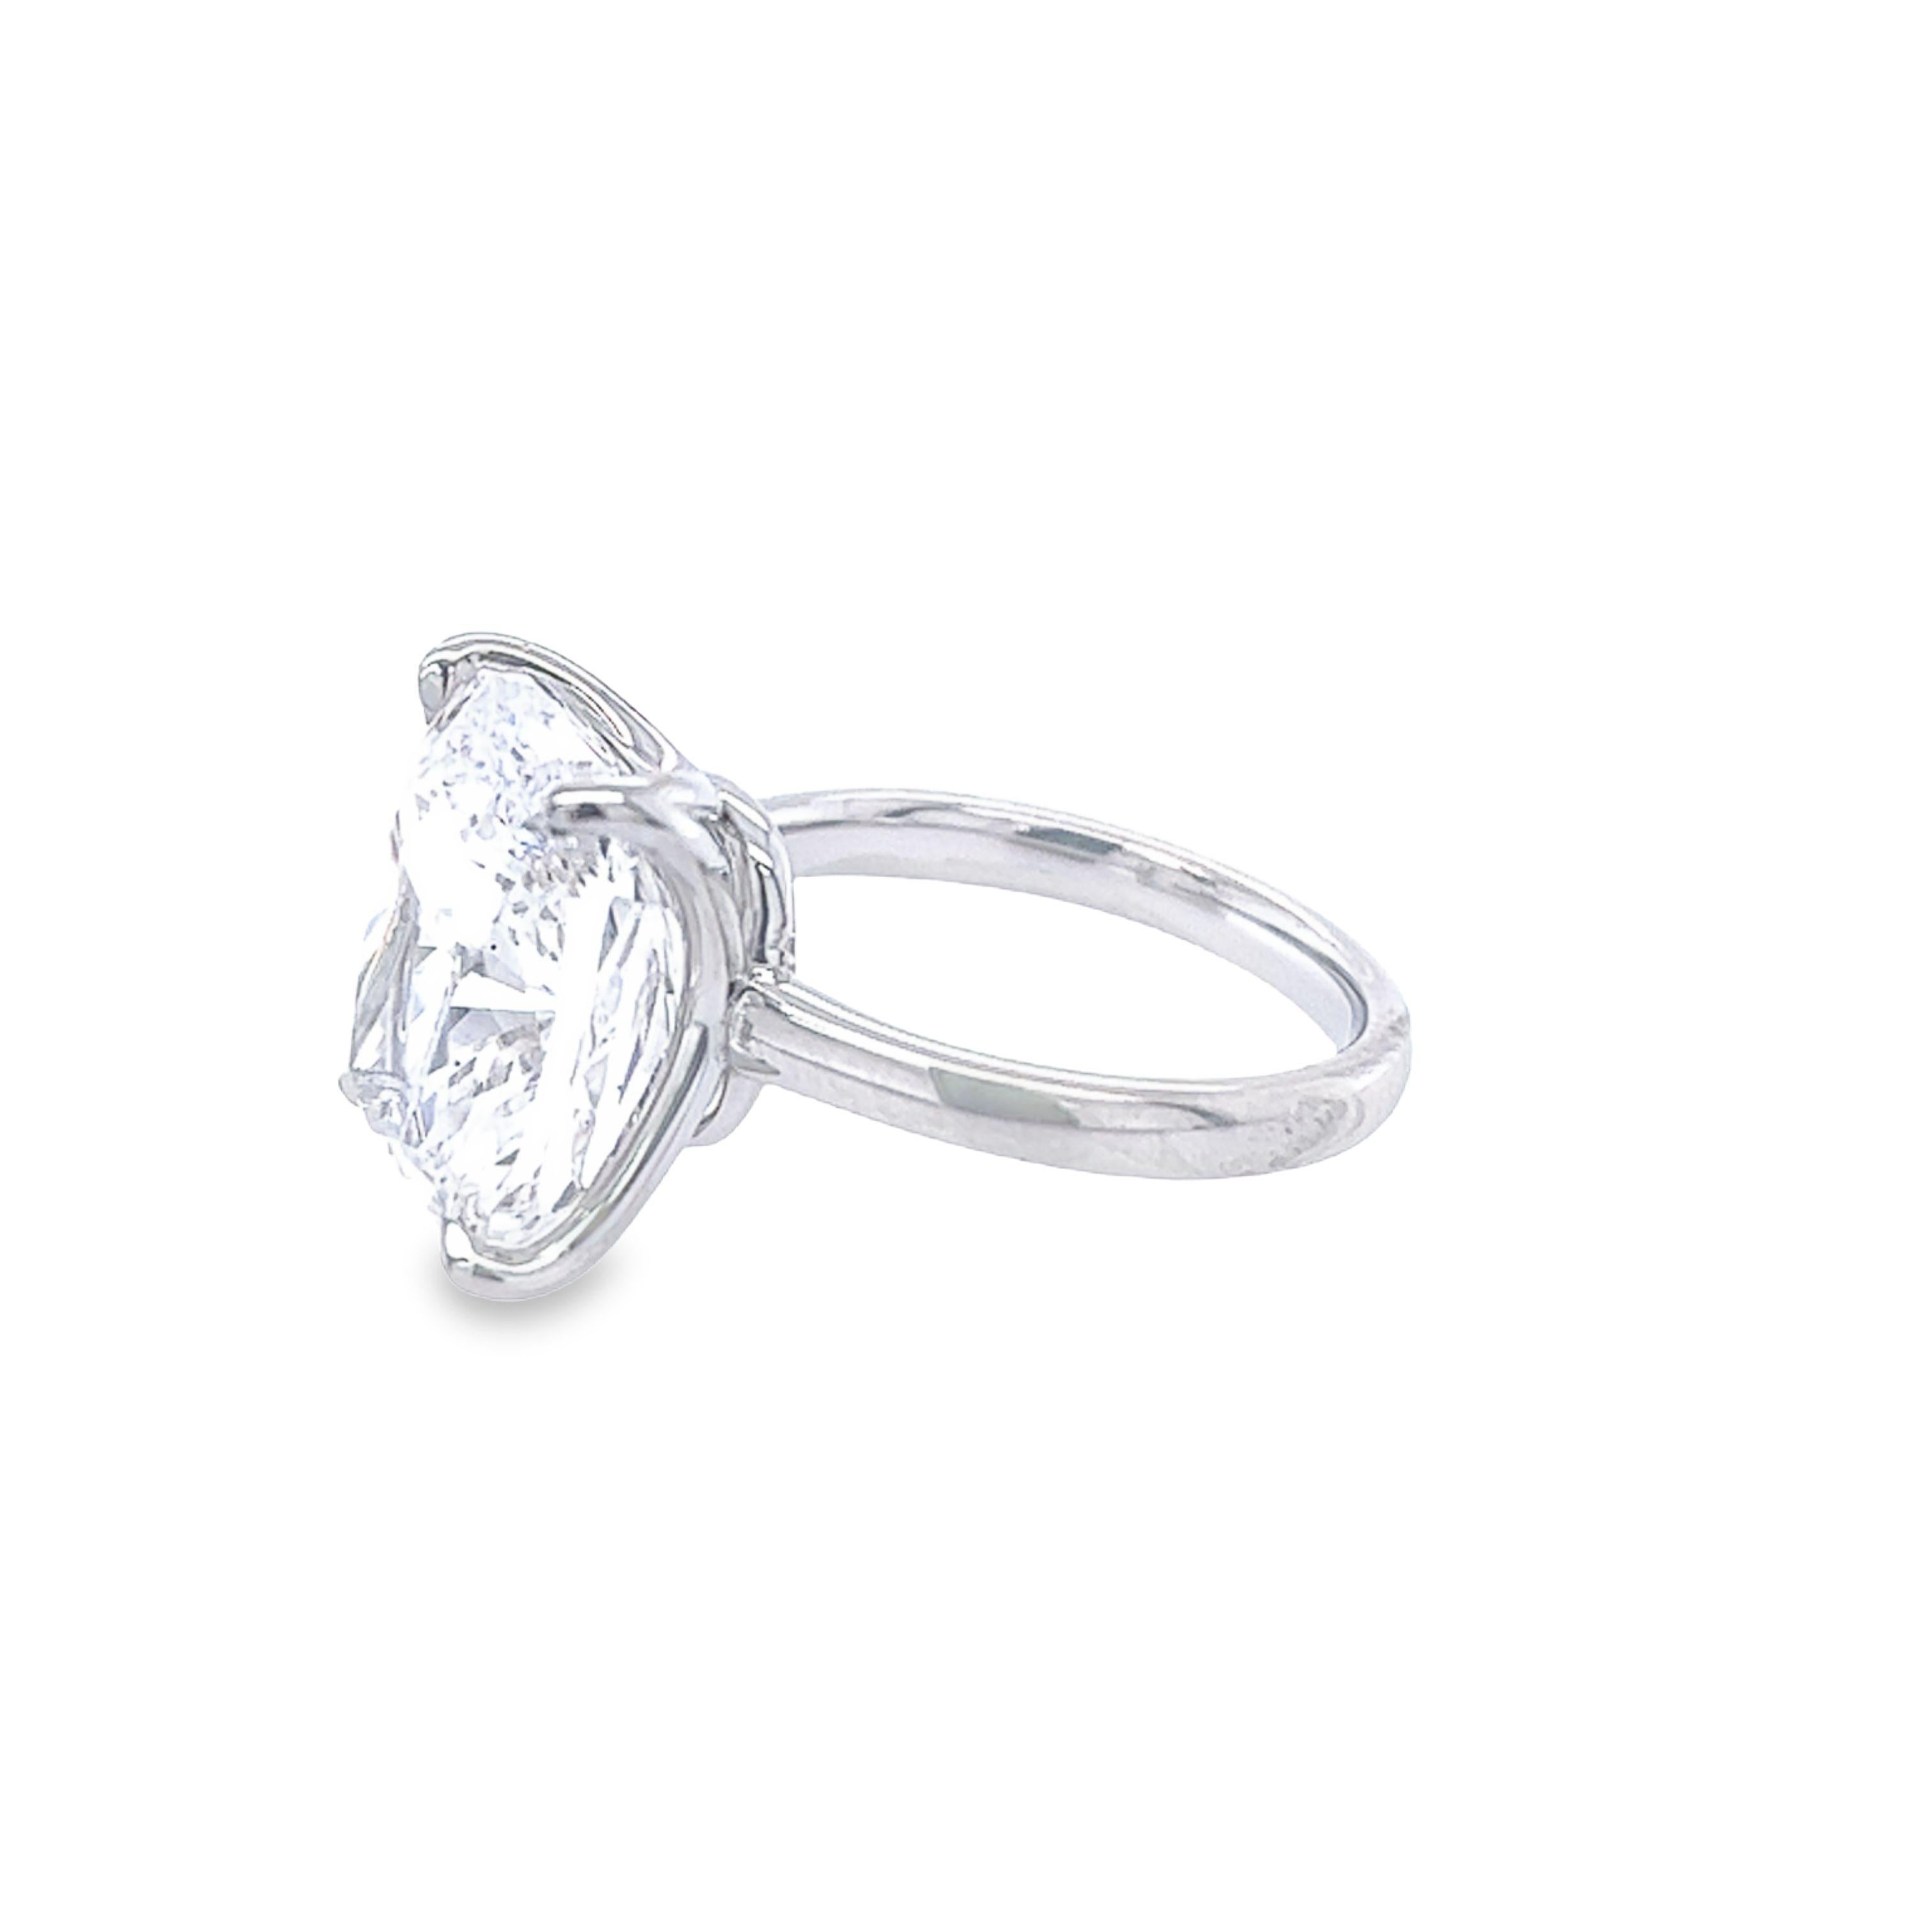 Rosenberg Diamonds & Co. 10.00 carat Cushion cut G color VS2 clarity is accompanied by a GIA certificate. This gorgeous cushion cut is full of brilliance and it is set in a handmade platinum setting designed by David Rosenberg.

Love this diamond